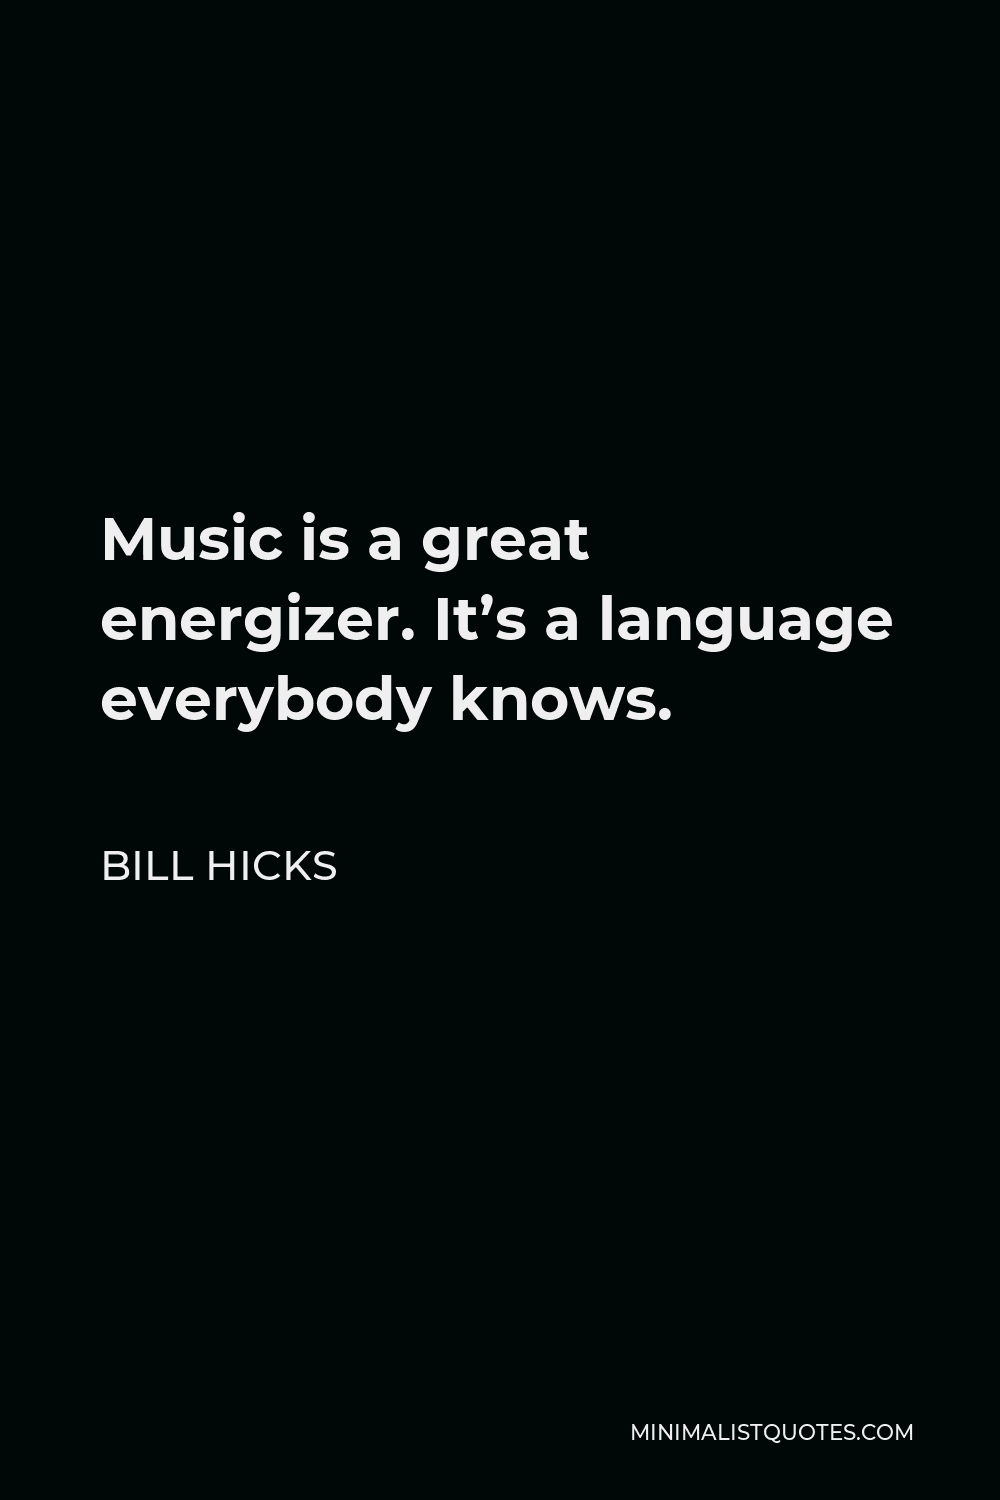 Bill Hicks Quote - Music is a great energizer. It’s a language everybody knows.